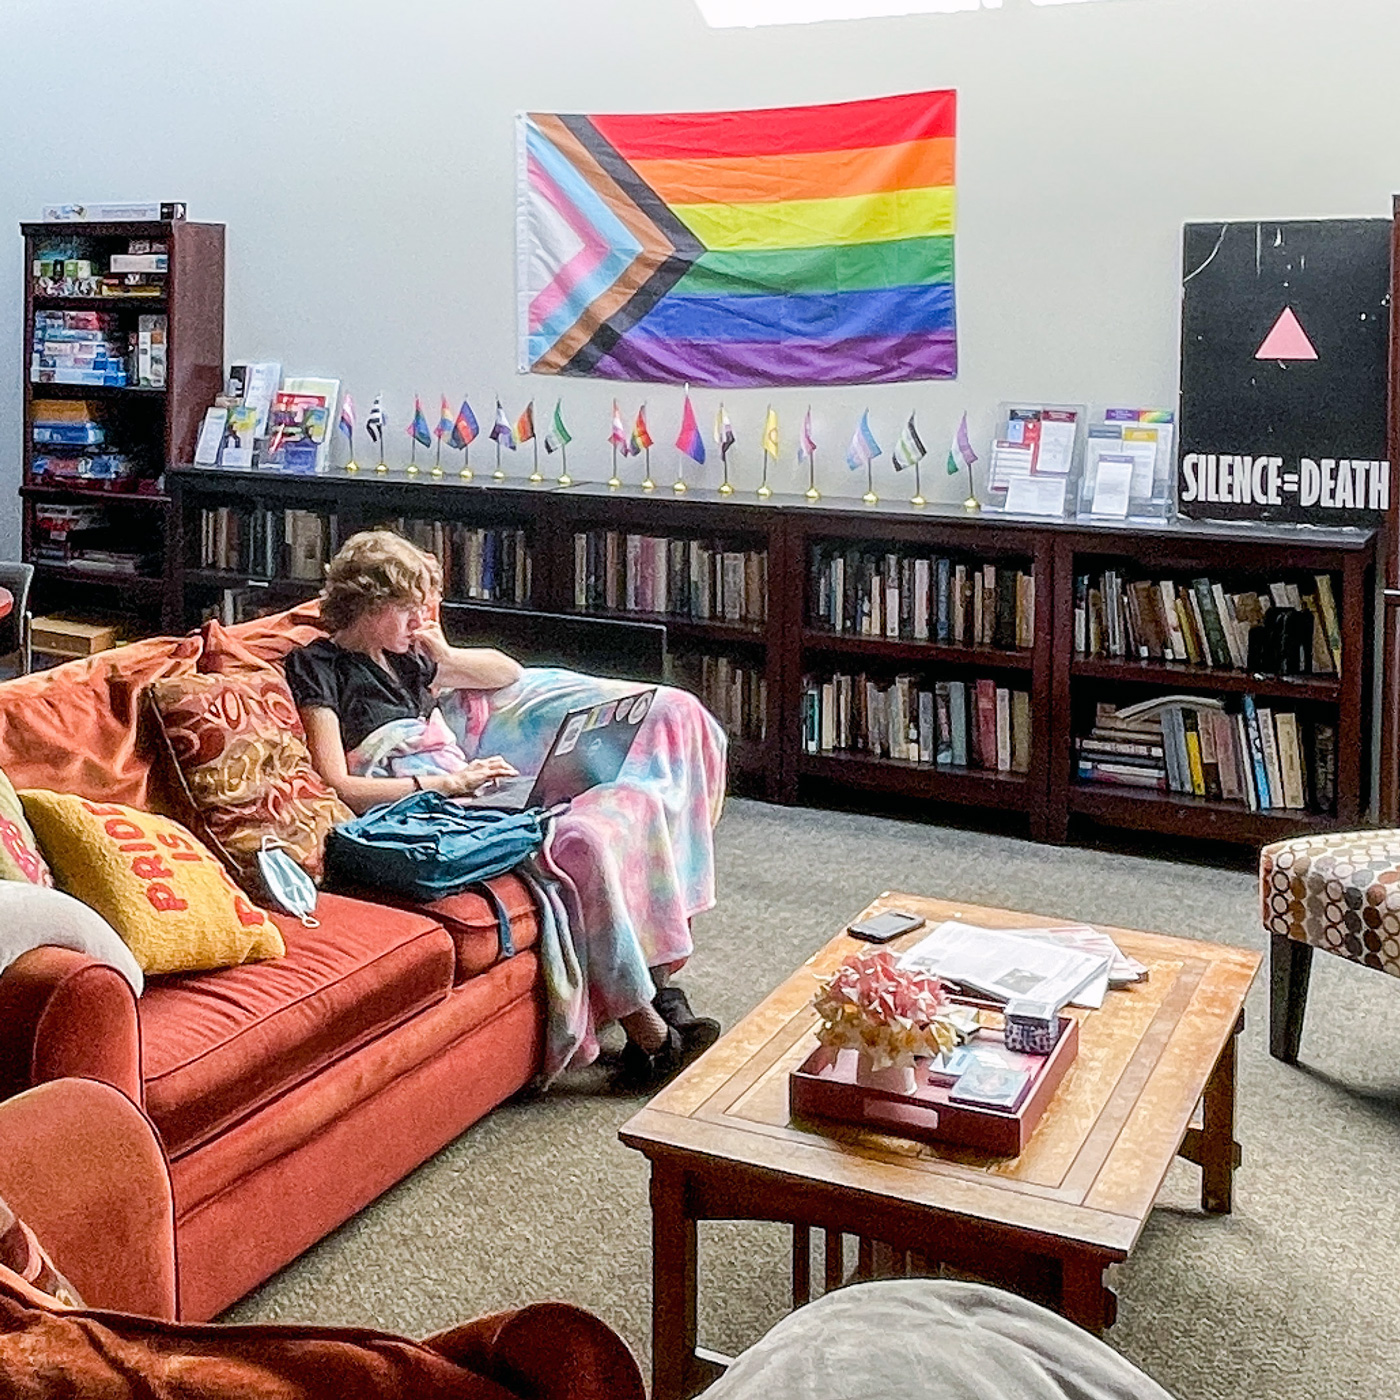 Person on a couch with laptop in a sunlit lounge with books, rainbow flags, posters, chairs and coffee tables.